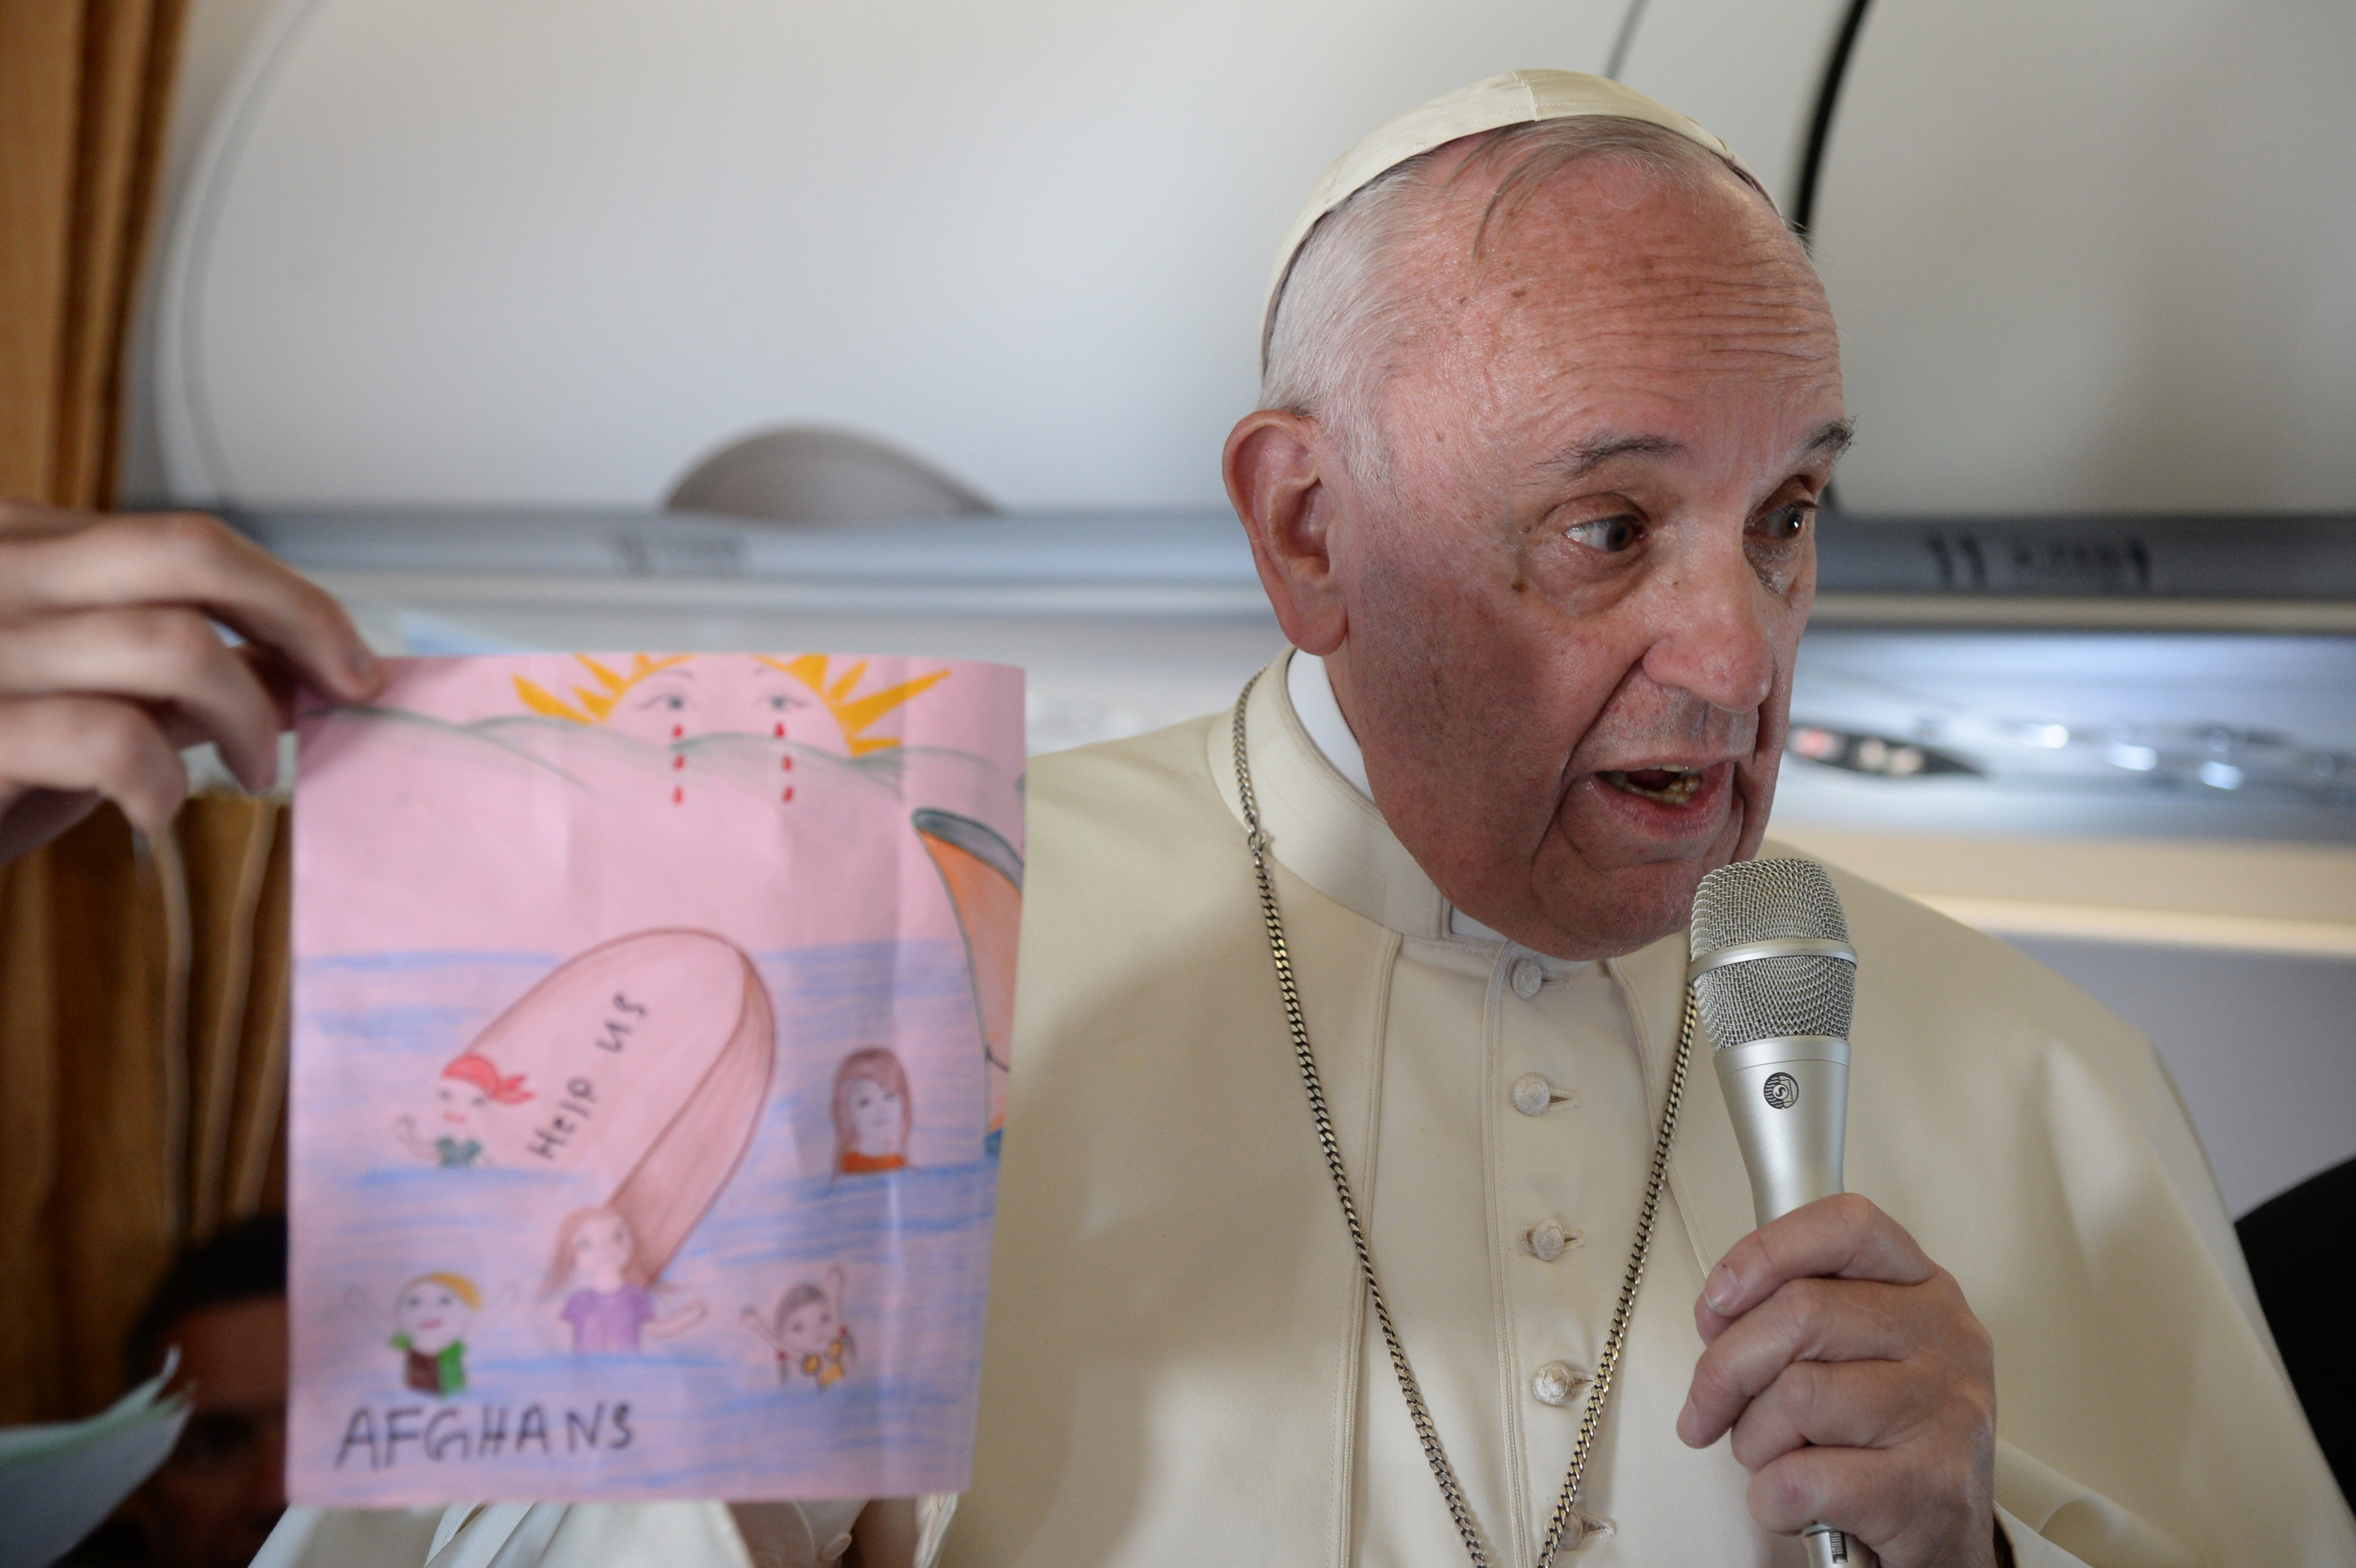 Pope Francis shows drawings made by children on his flight back to Rome following a visit at the Moria refugee camp on April 16, 2016 in the Greek island of Lesbos. Twelve Syrian refugees were accompanying Pope Francis on his return flight to Rome after his visit to Lesbos on Saturday and will be housed in the Vatican, the Holy See said. Pope Francis, Orthodox Patriarch Bartholomew and Archbishop of Athens and All Greece Ieronymos II visit Lesbos today to turn the spotlight on Europe's controversial deal with Turkey to end an unprecedented refugee crisis.  AFP PHOTO POOL / FILIPPO MONTEFORTE / AFP PHOTO / POOL / FILIPPO MONTEFORTE